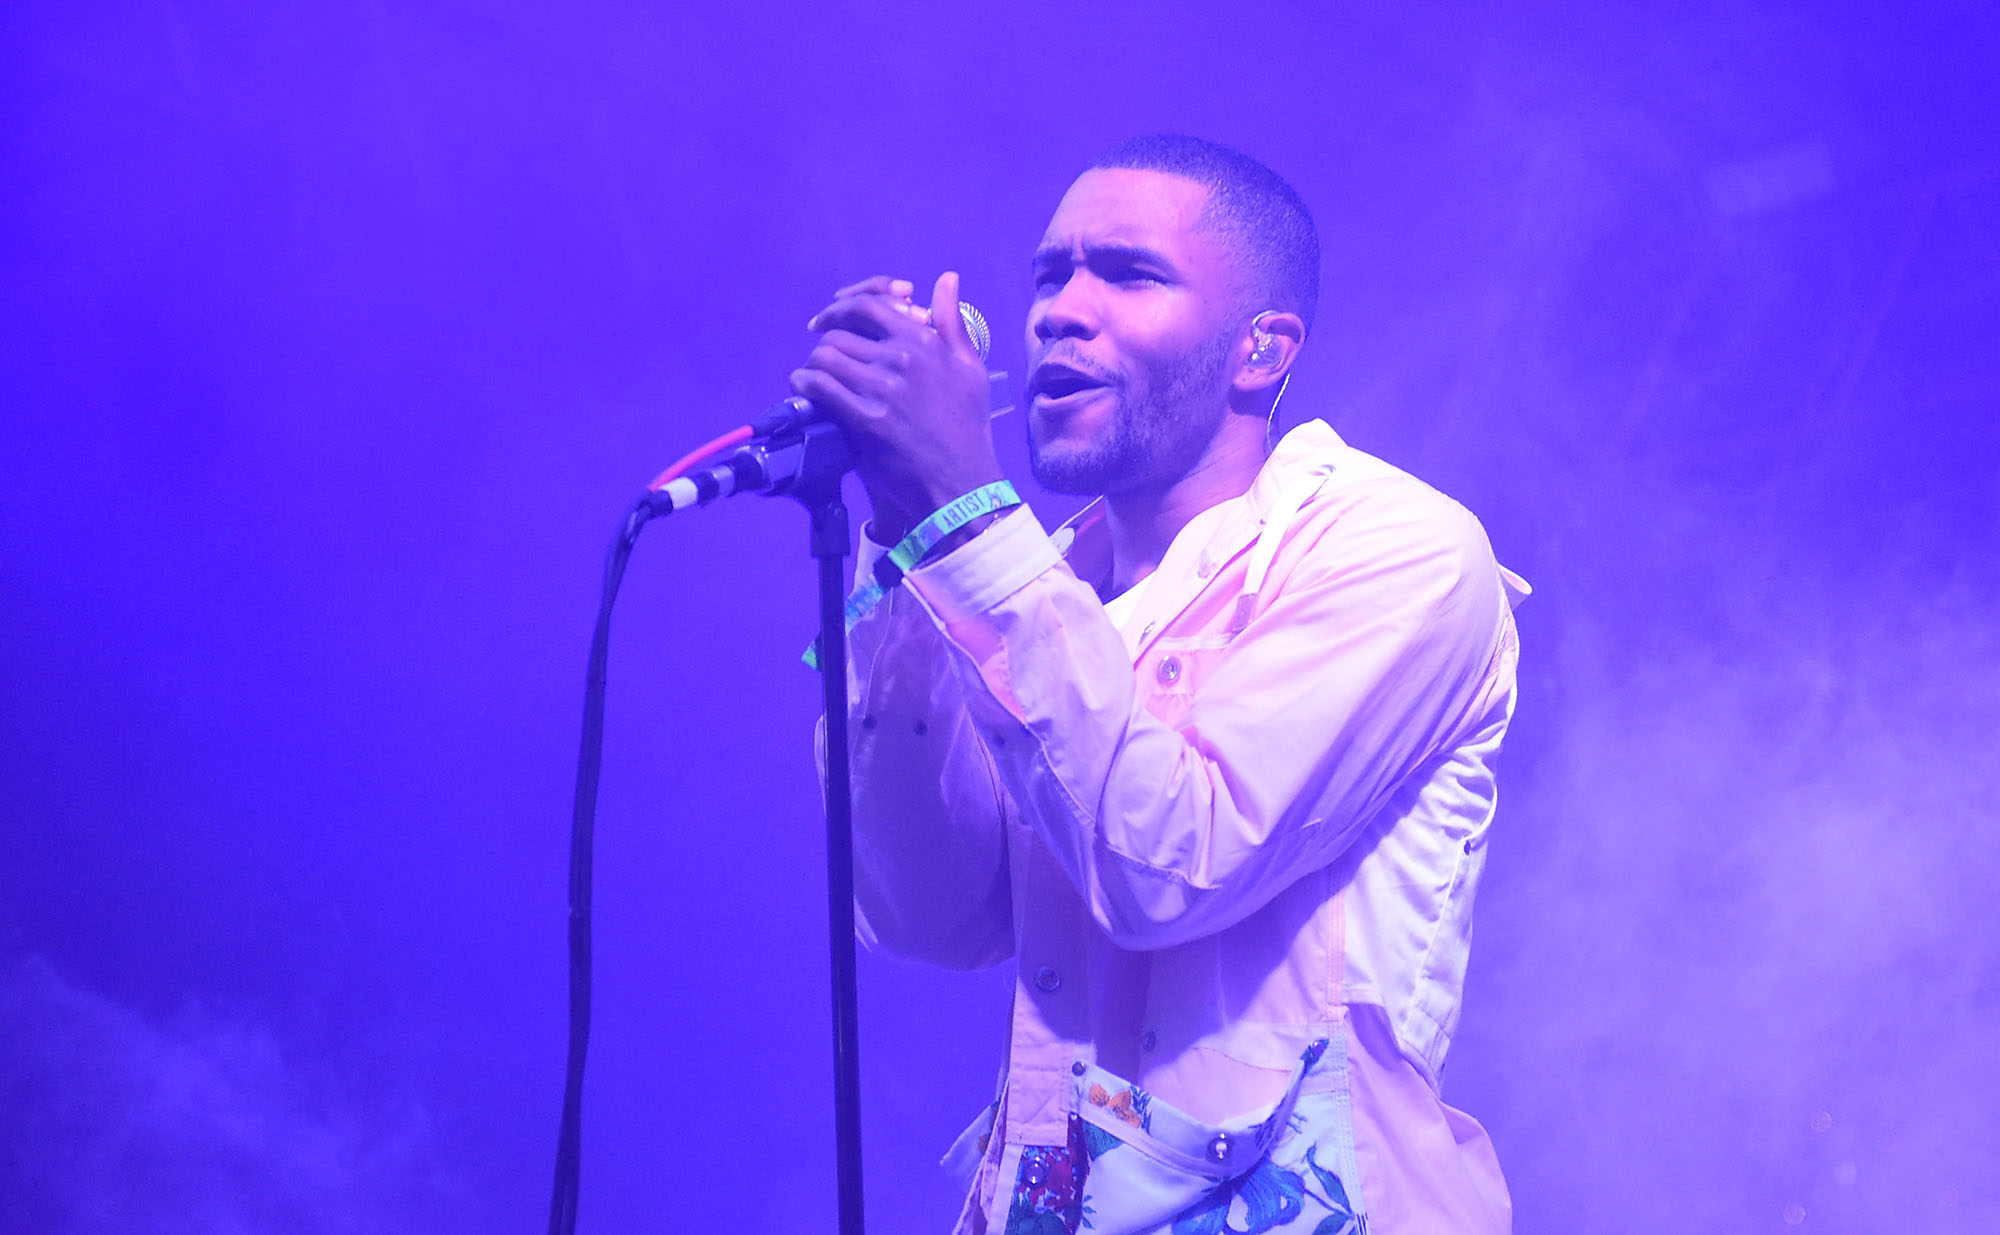 Frank Ocean performs during the 2014 Bonnaroo Music &amp; Arts Festival on June 14, 2014 in Manchester, Tennessee.  (Photo by Jason Merritt/Getty Images) (Jason Merritt&mdash;Getty Images)